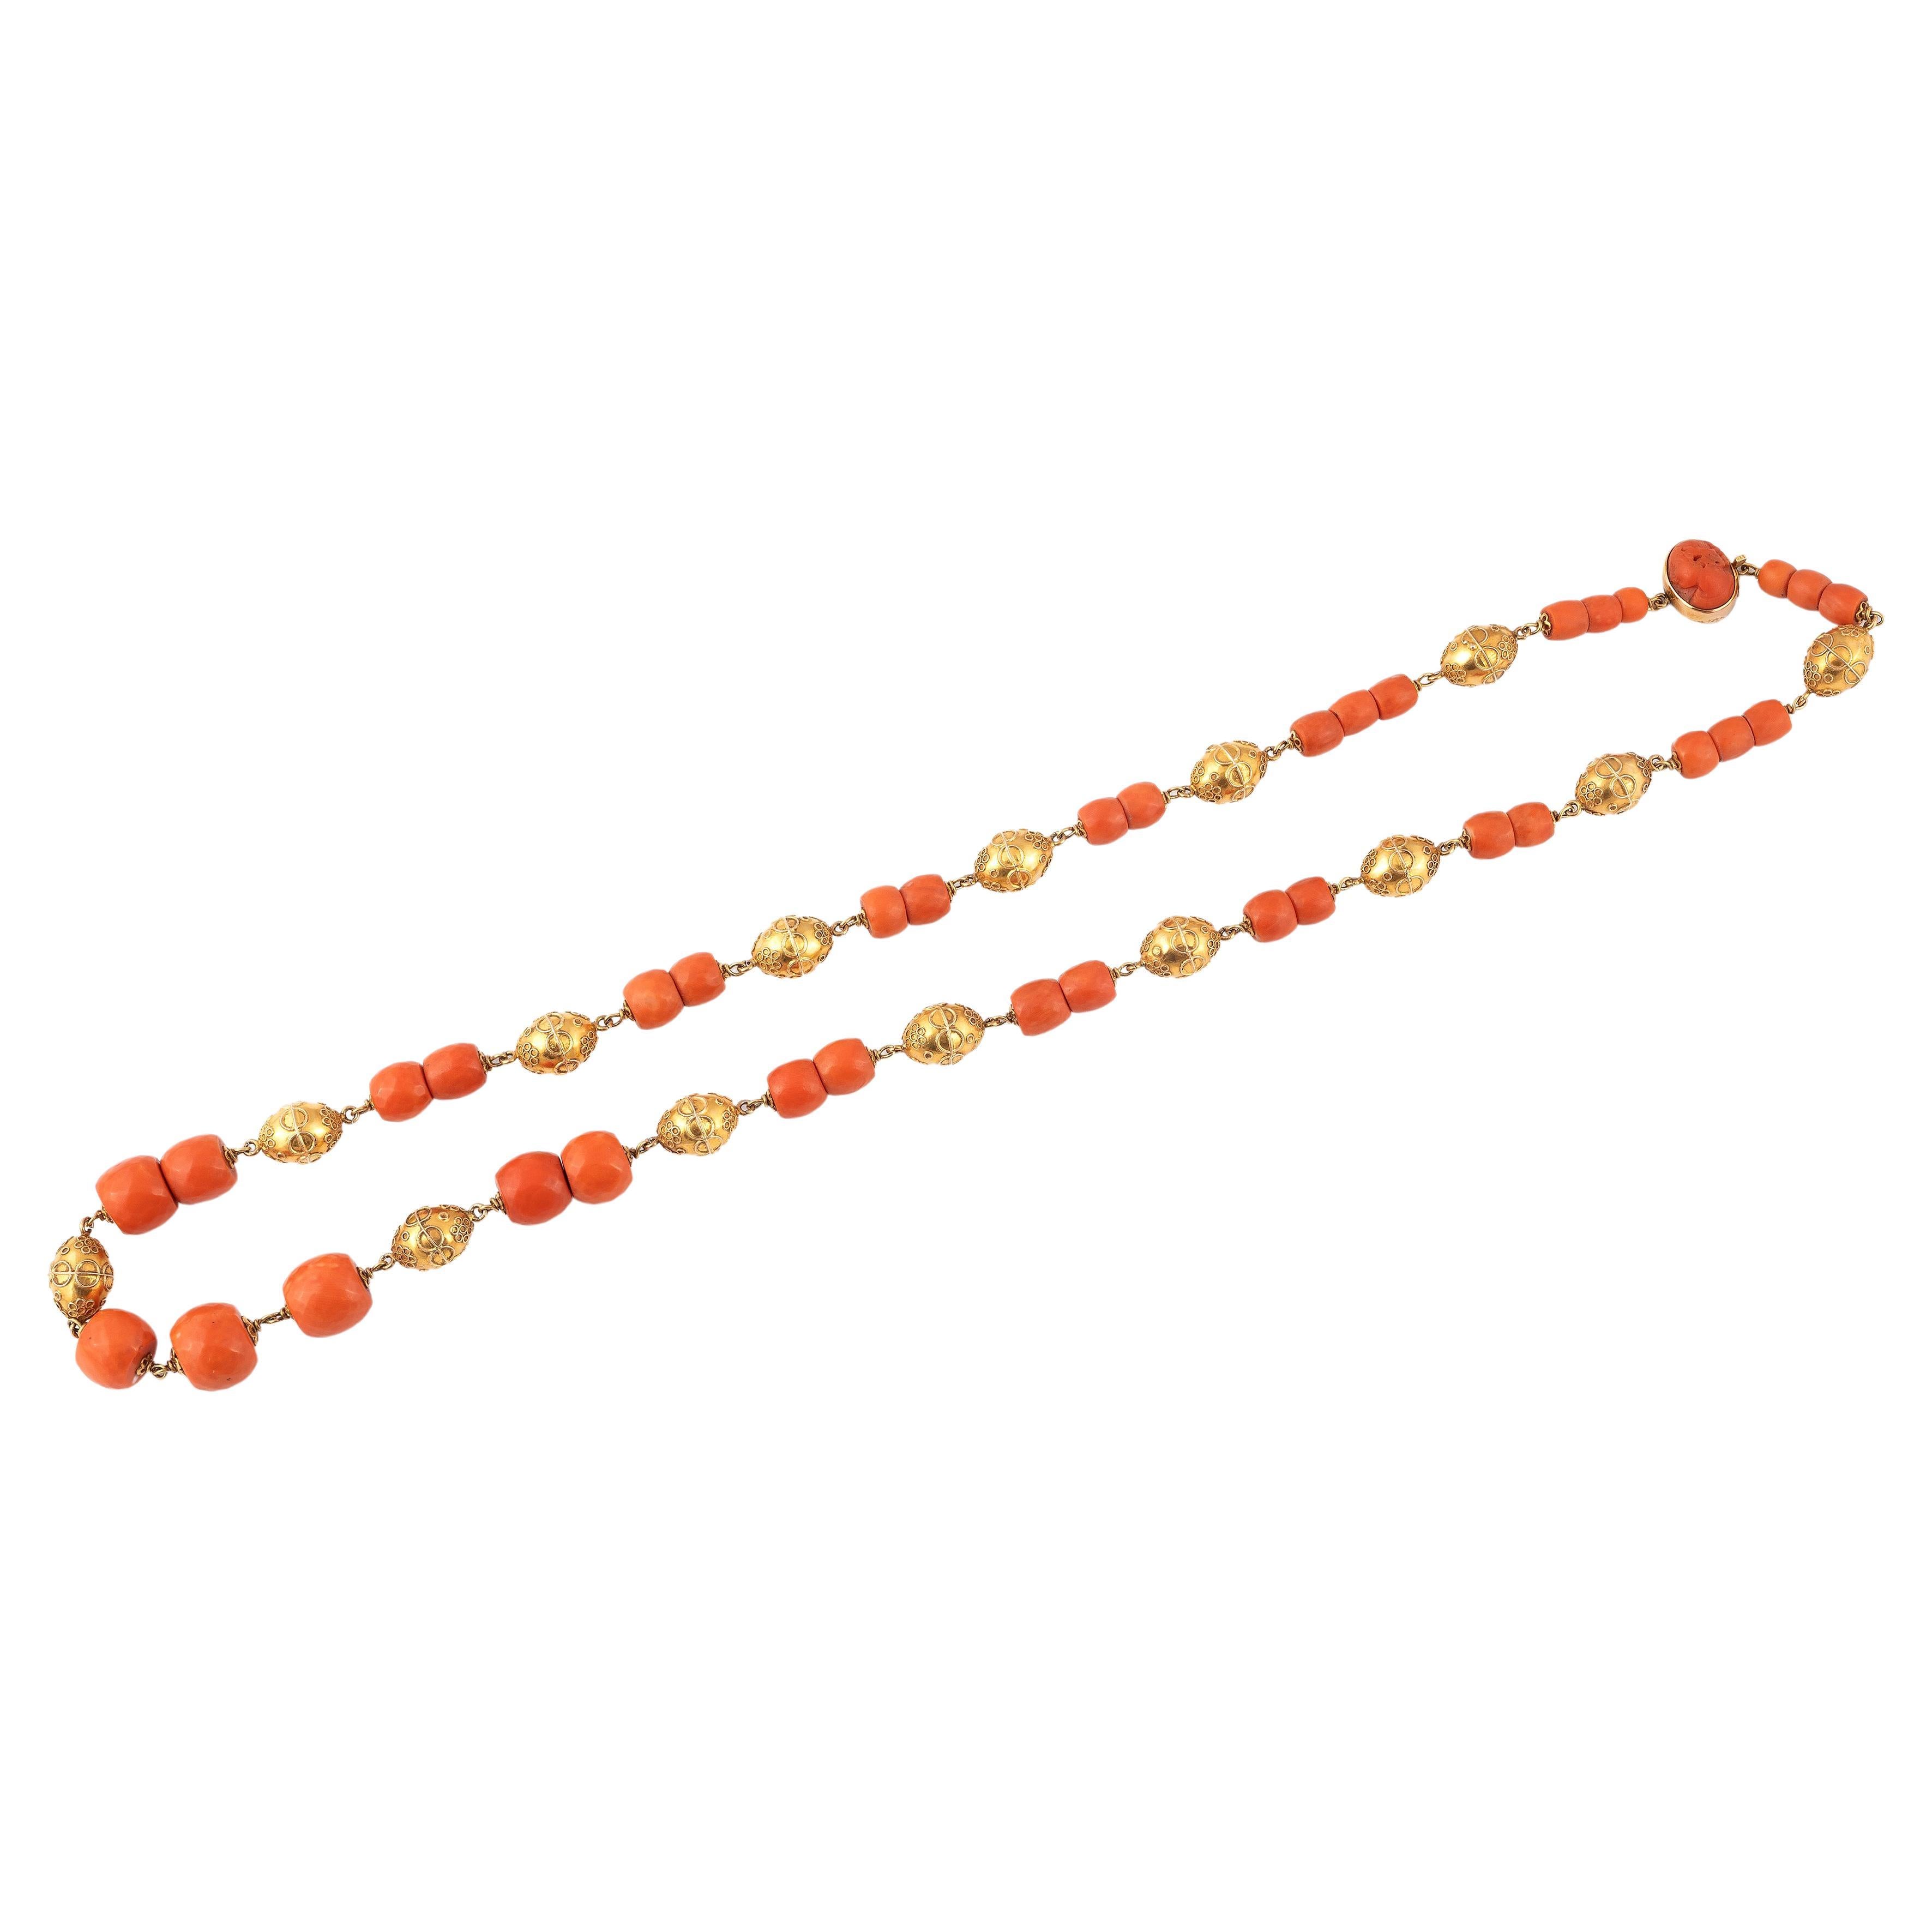 
Composed of seventy-five coral beads, measuring approximately 11.9 to 4.6mm, interspersed with archeological style  gold spheres
Length: 82cm
Weight: 135gr.